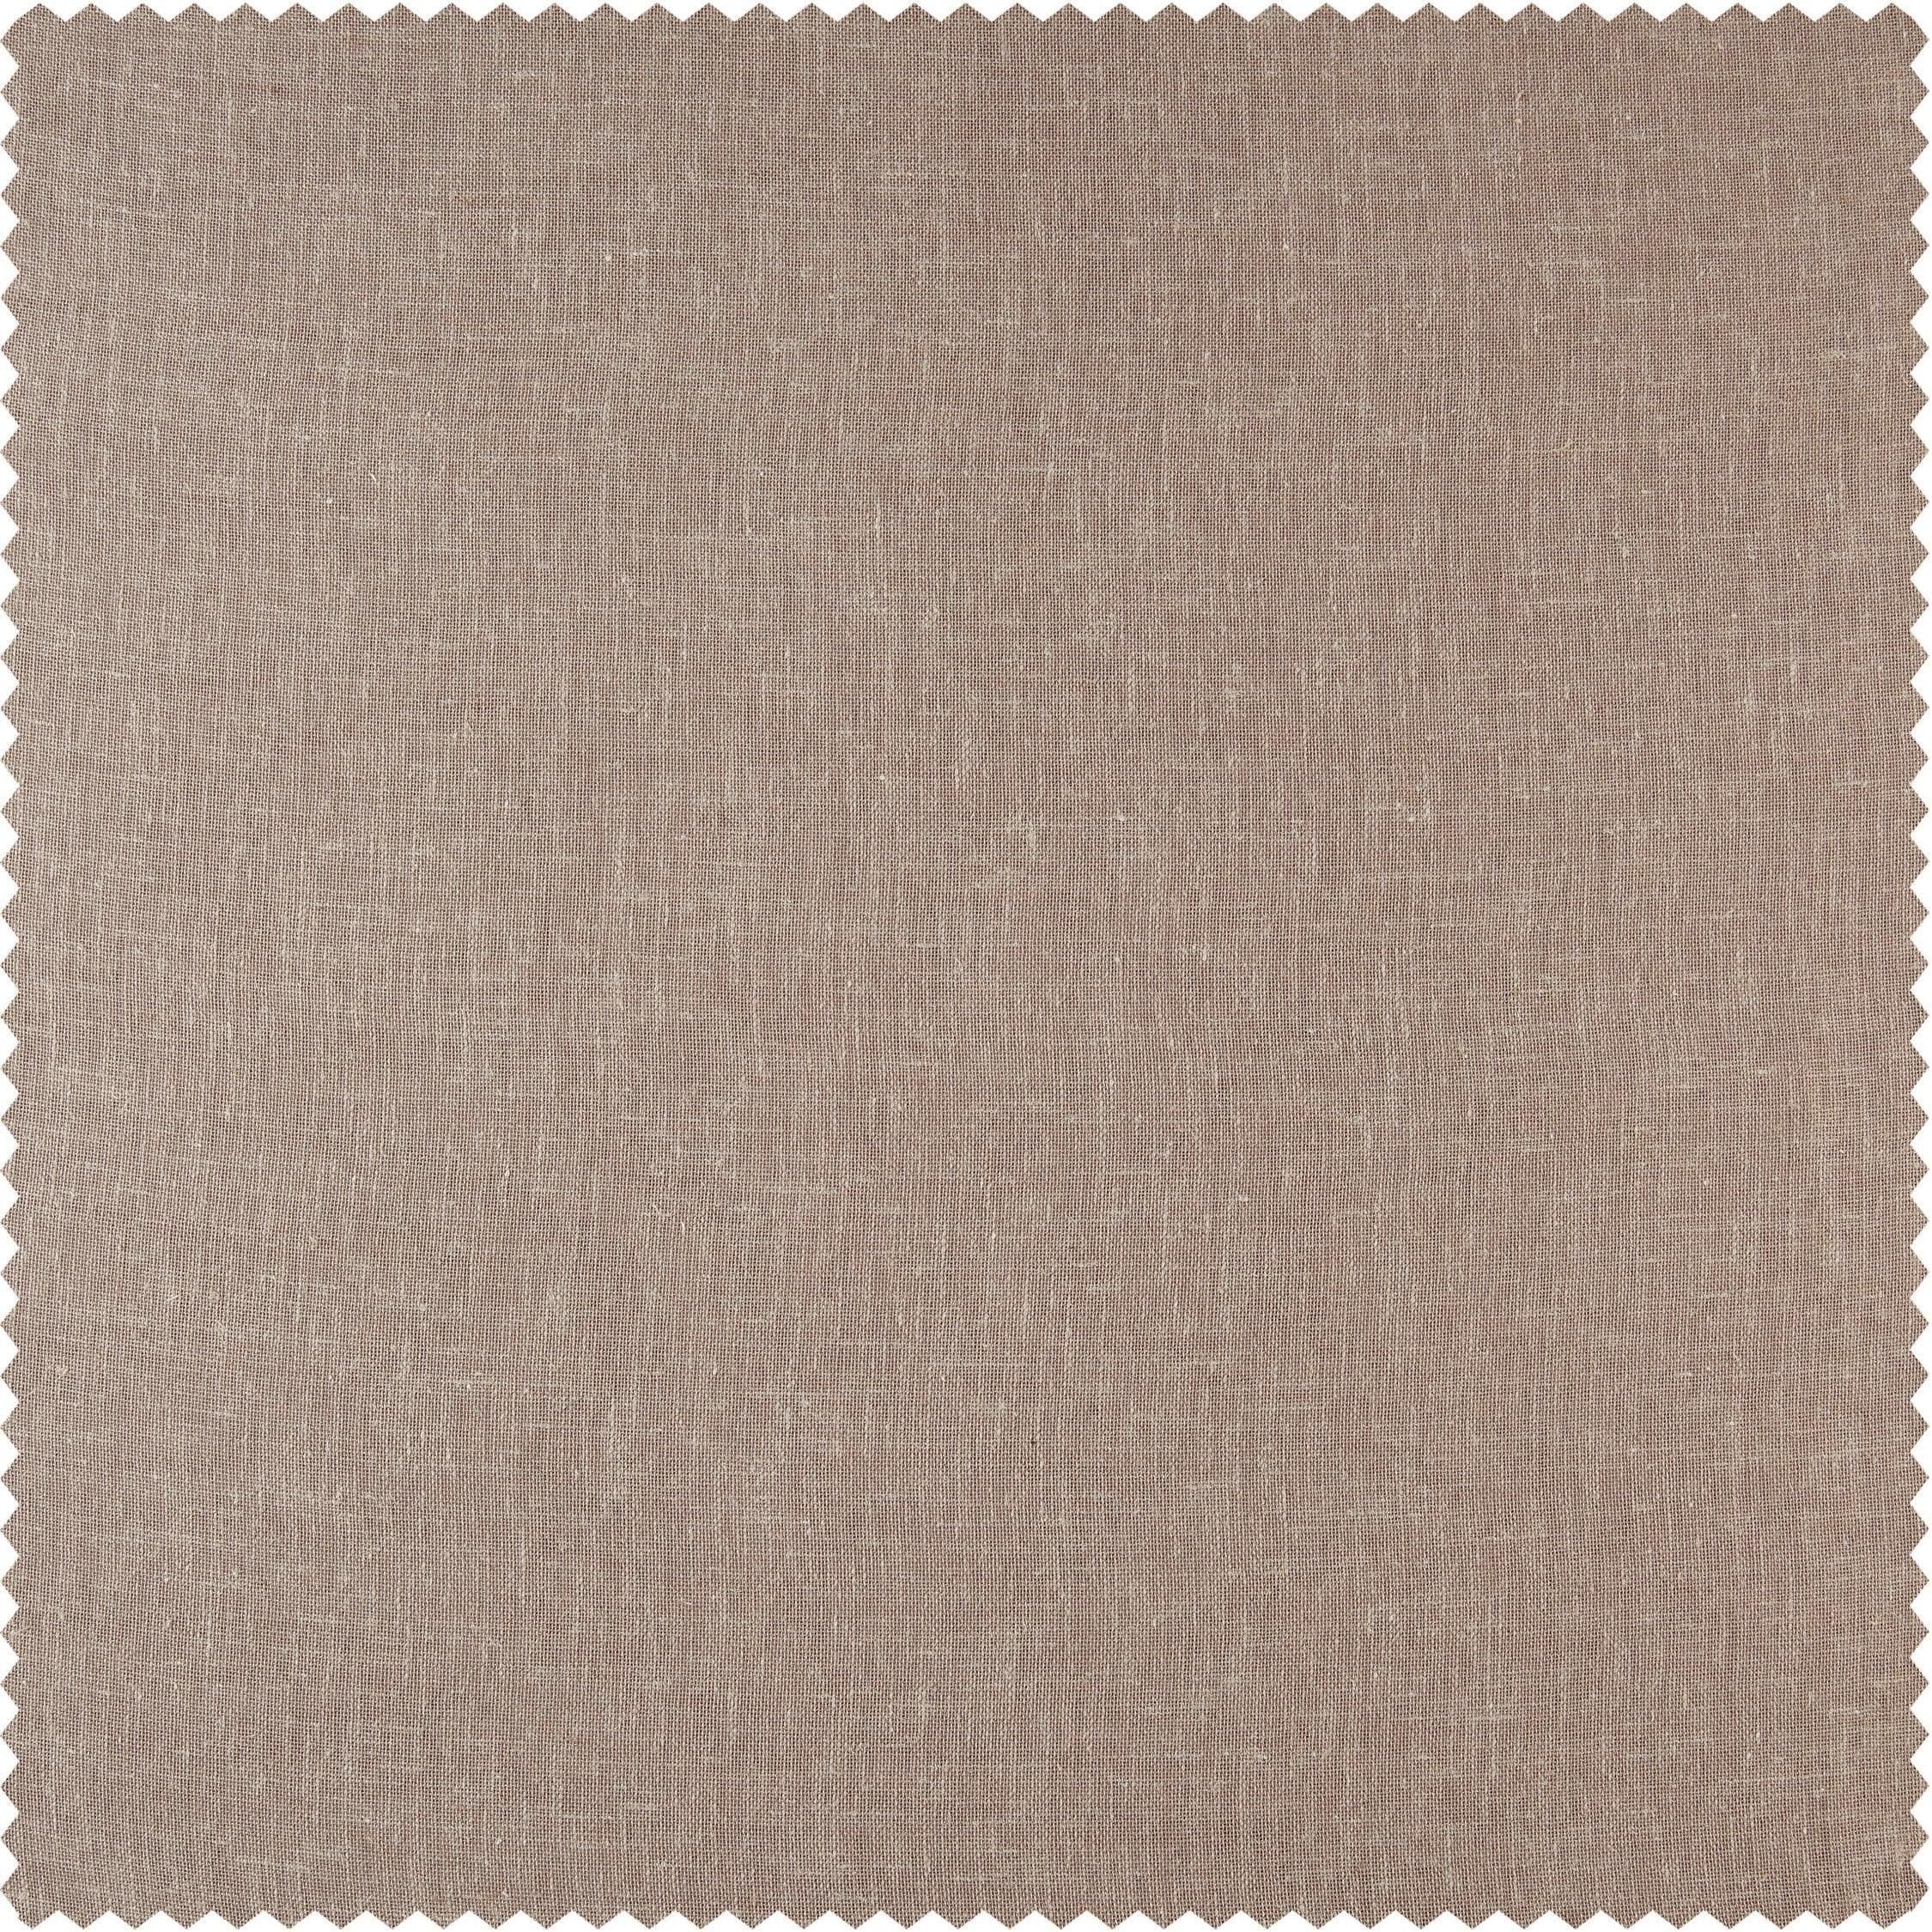 Soft Taupe Textured Faux Linen Swatch